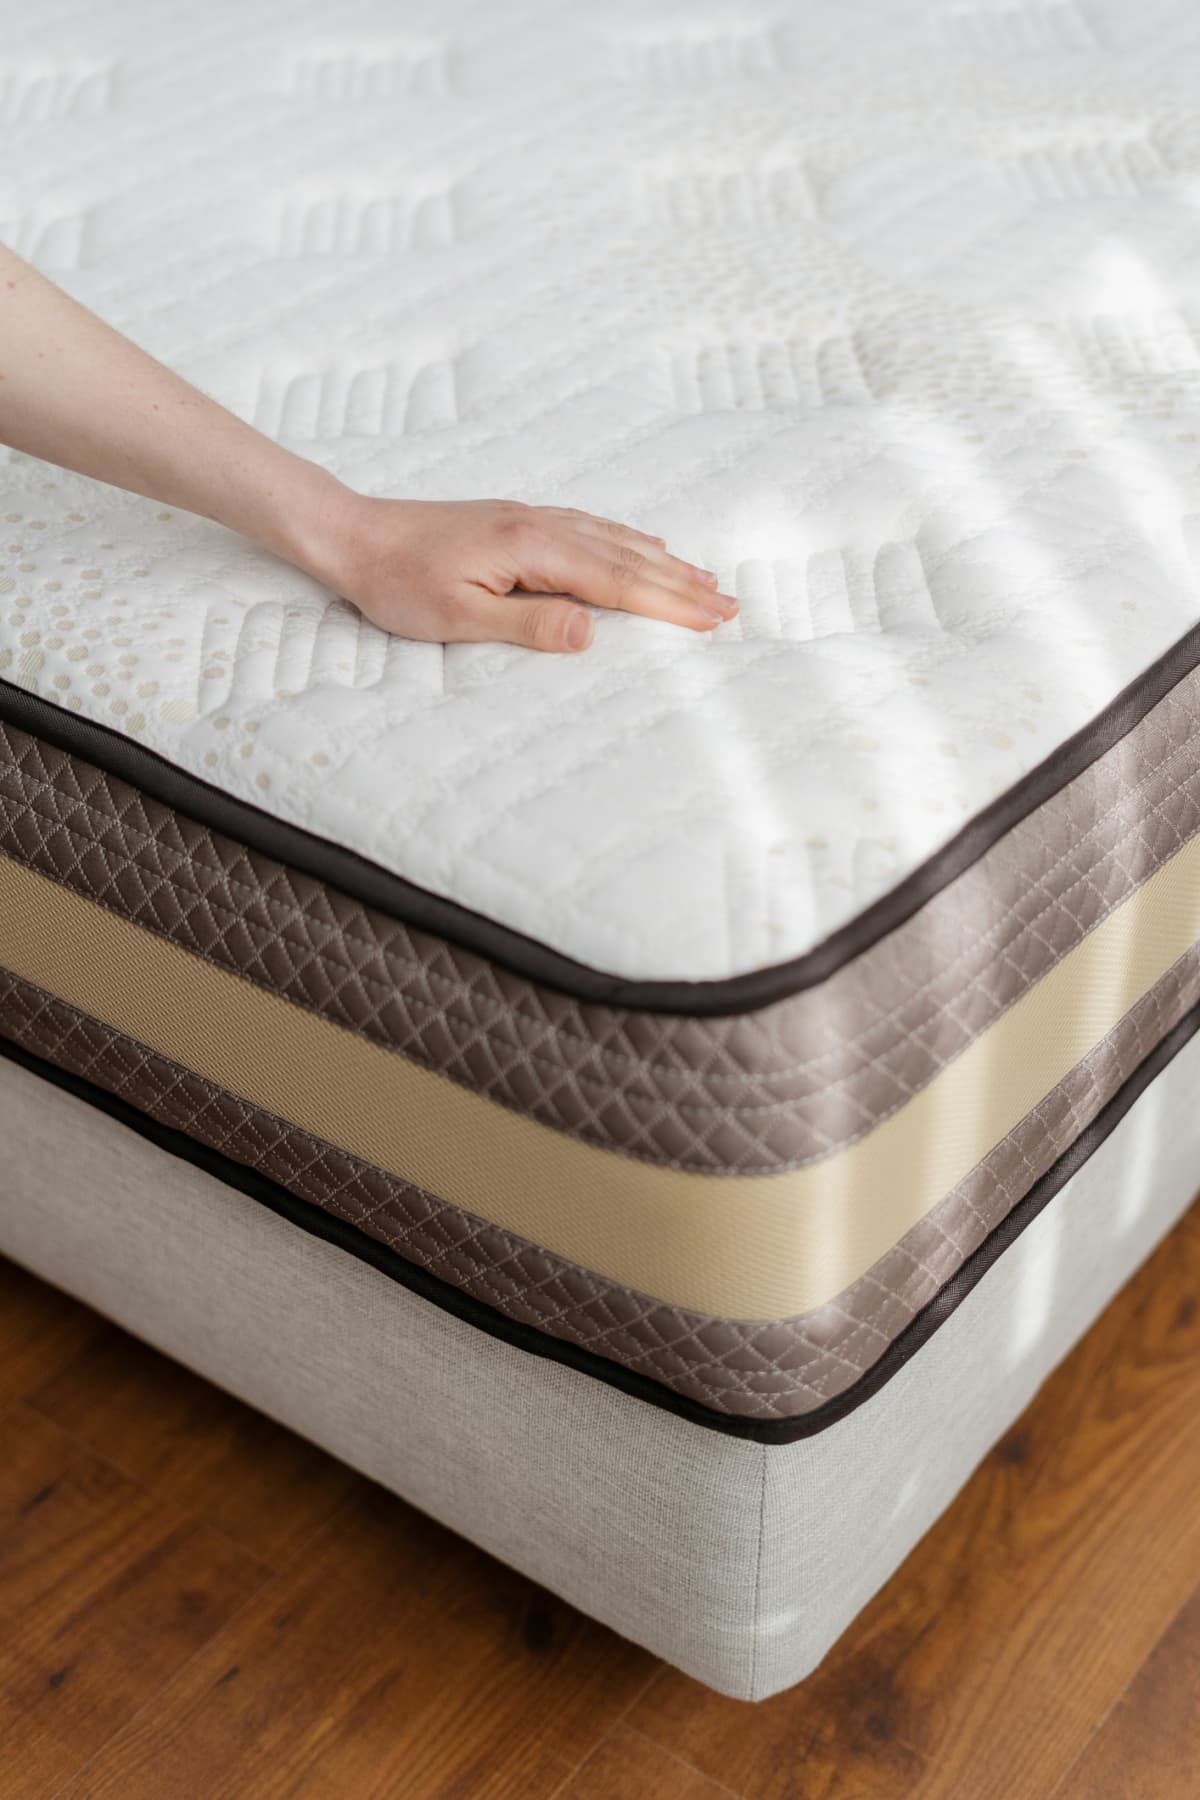 A person with their hand on a mattress